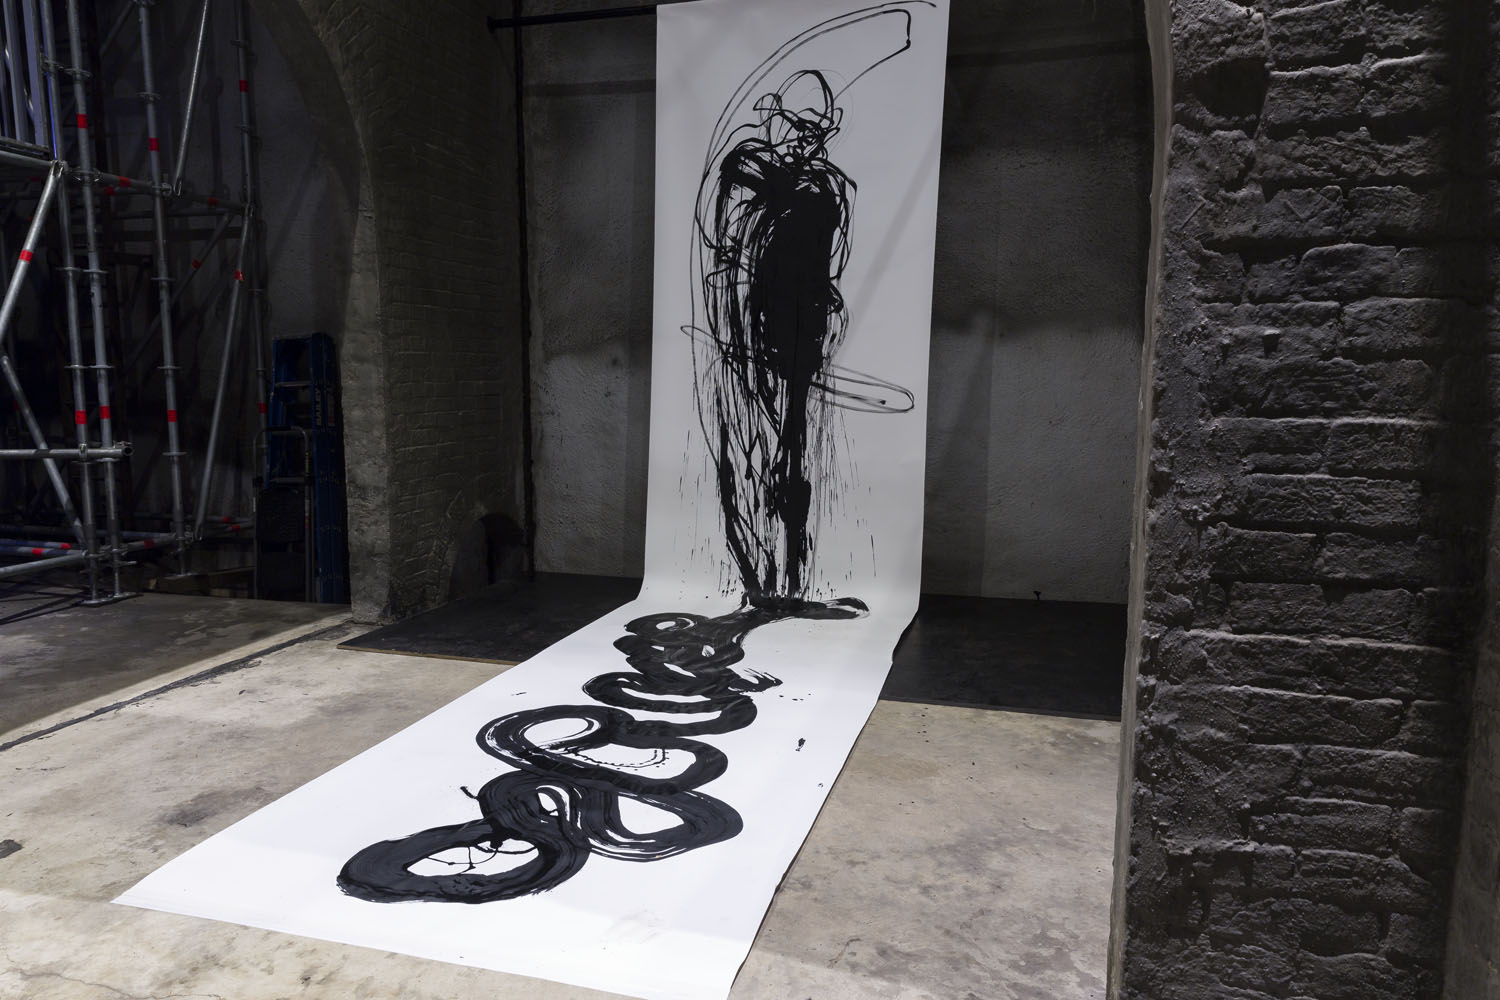  Kellie O'Dempsey and Michael Dick, installation view of  Under Arena  2015. Photographer Emma Wright 